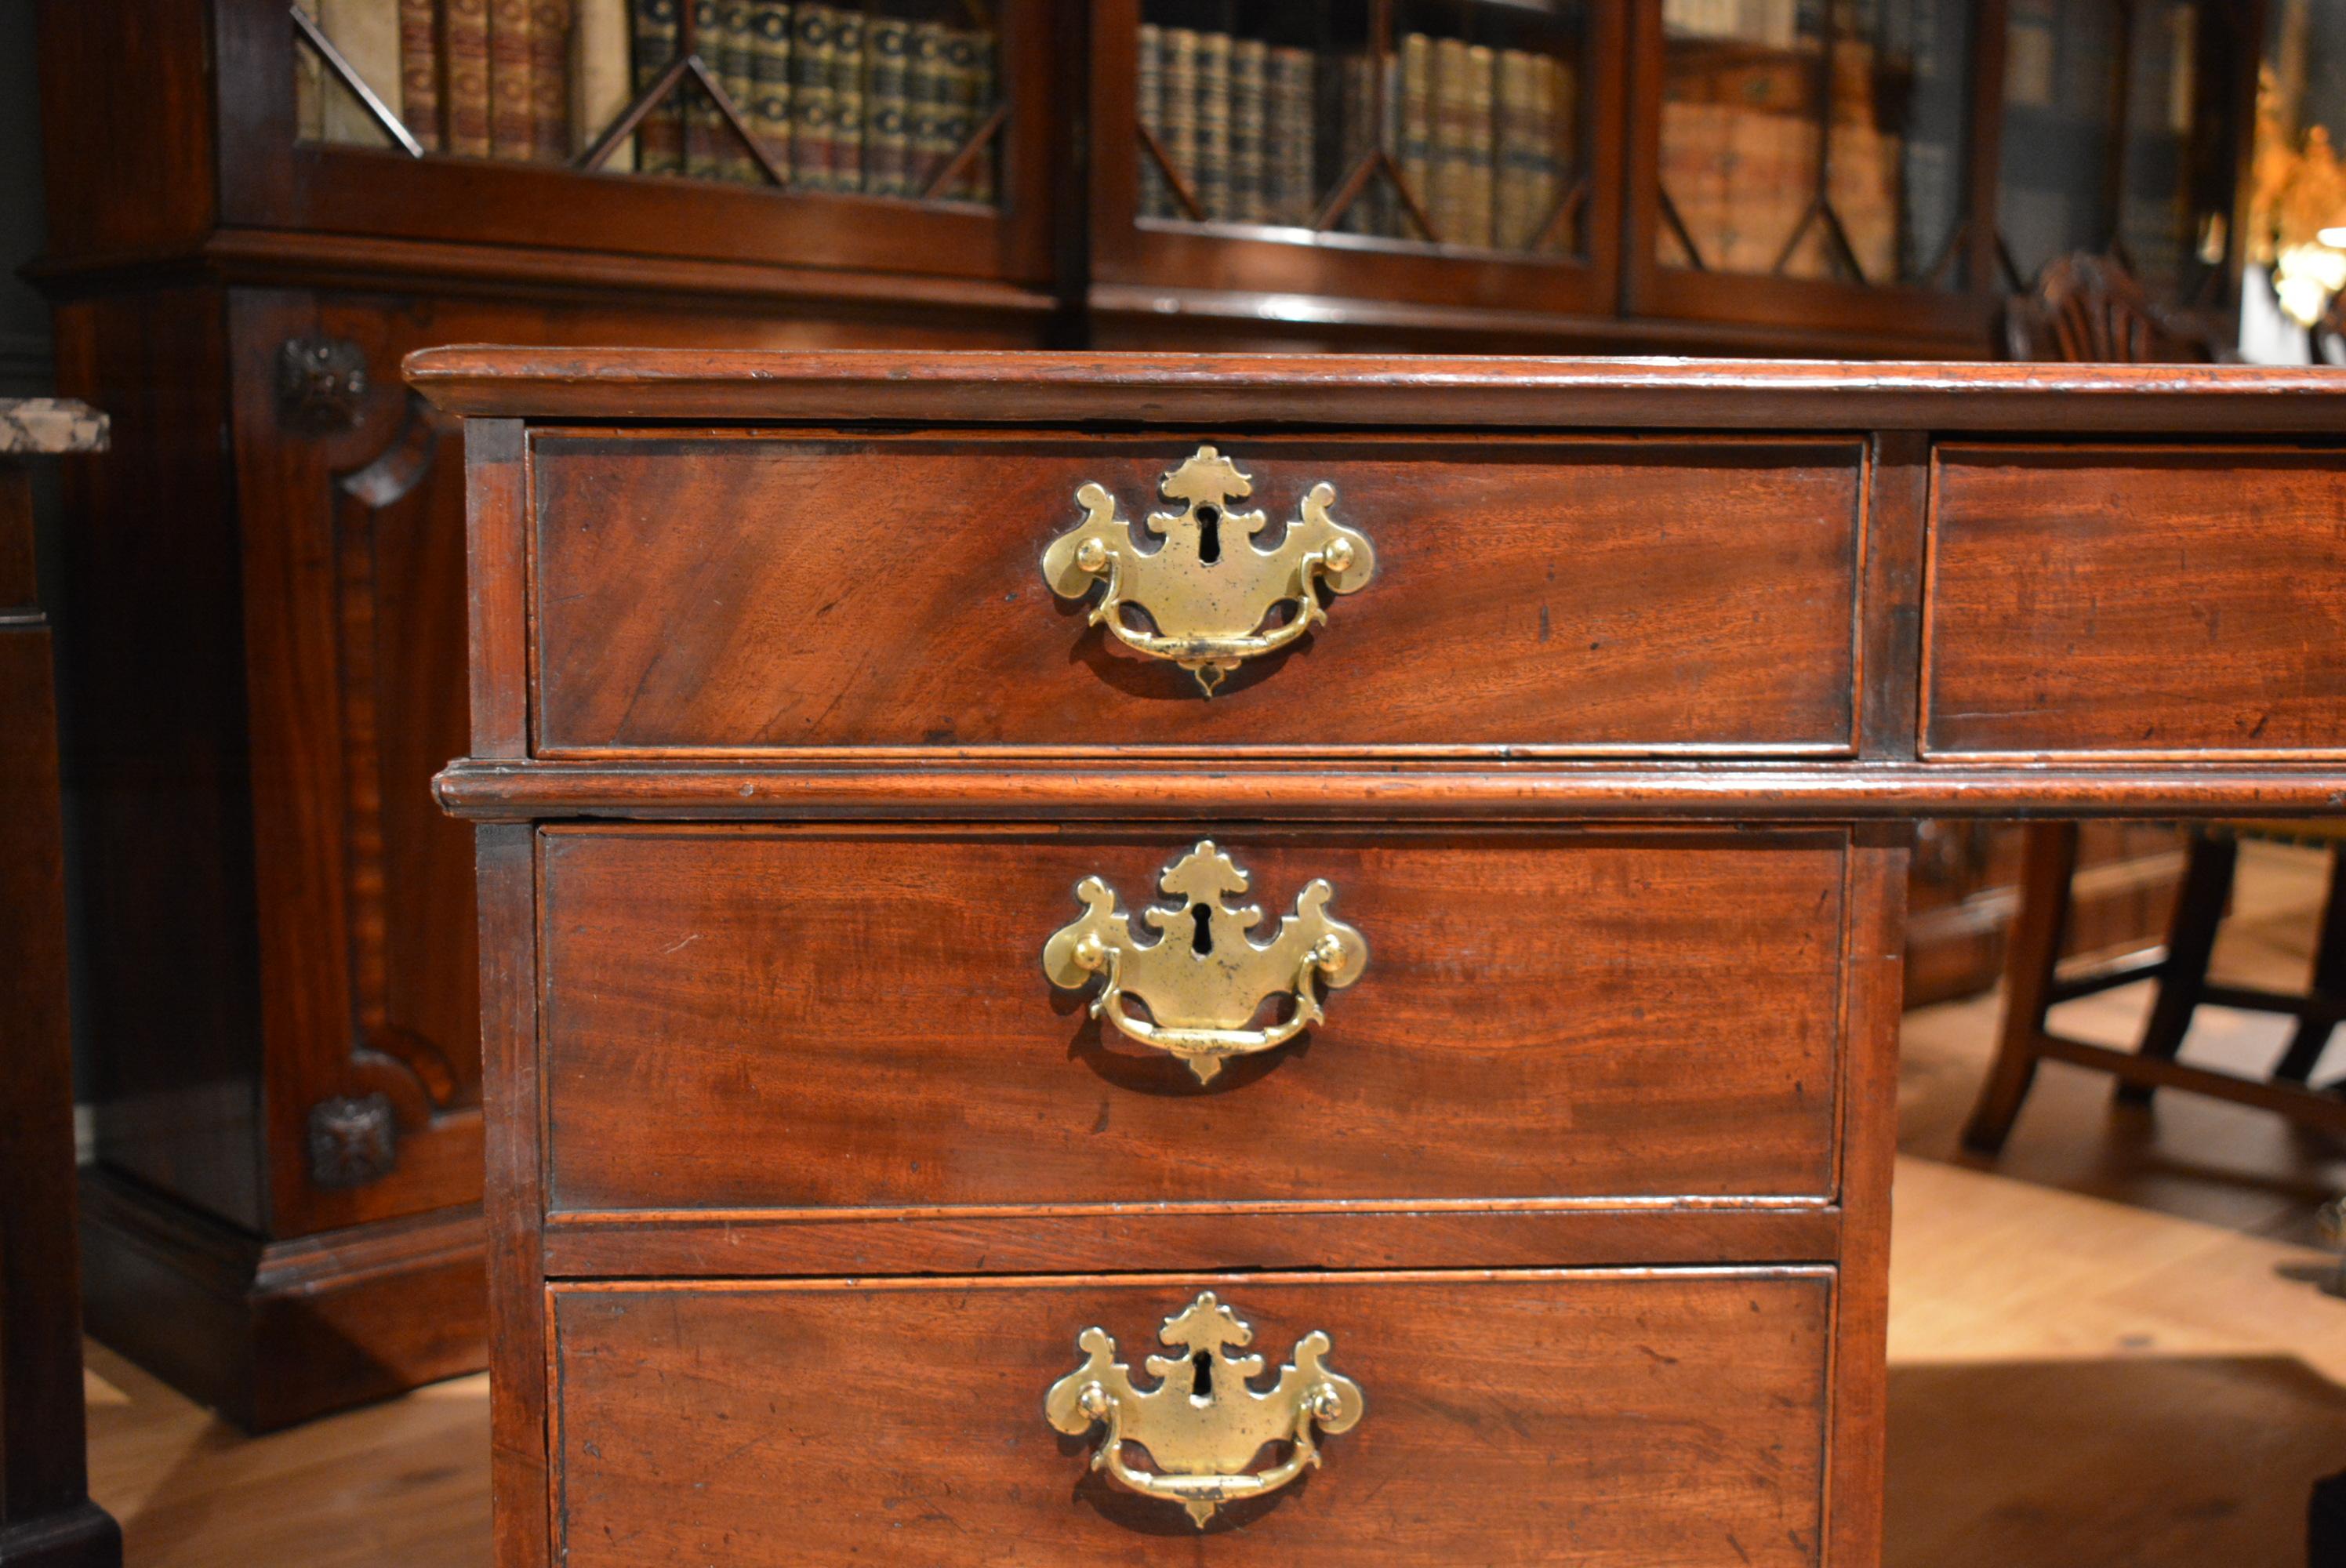 George II mahogany freestanding partners desk with the same configuration of drawers to both sides.
The patination and color are excellent, the brasses are all original, and the leather is very nice, old, soft, but not at all tatty.